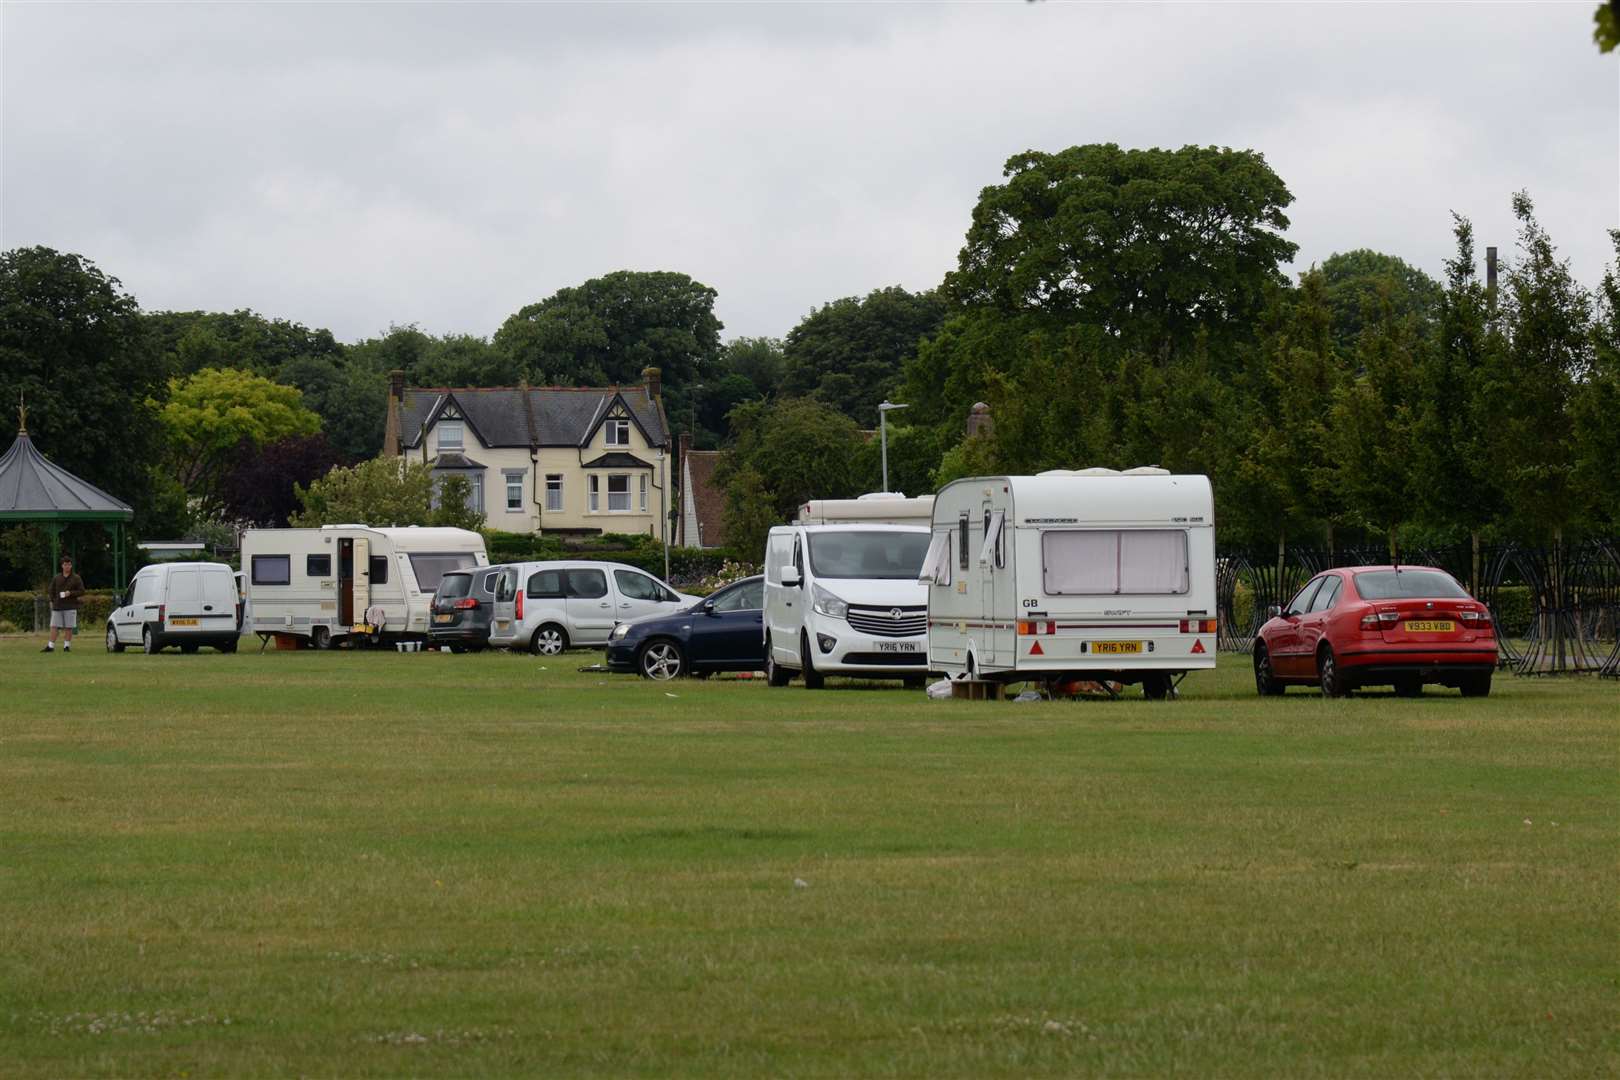 Travellers were previously in contempt of court if they pitched up on council land